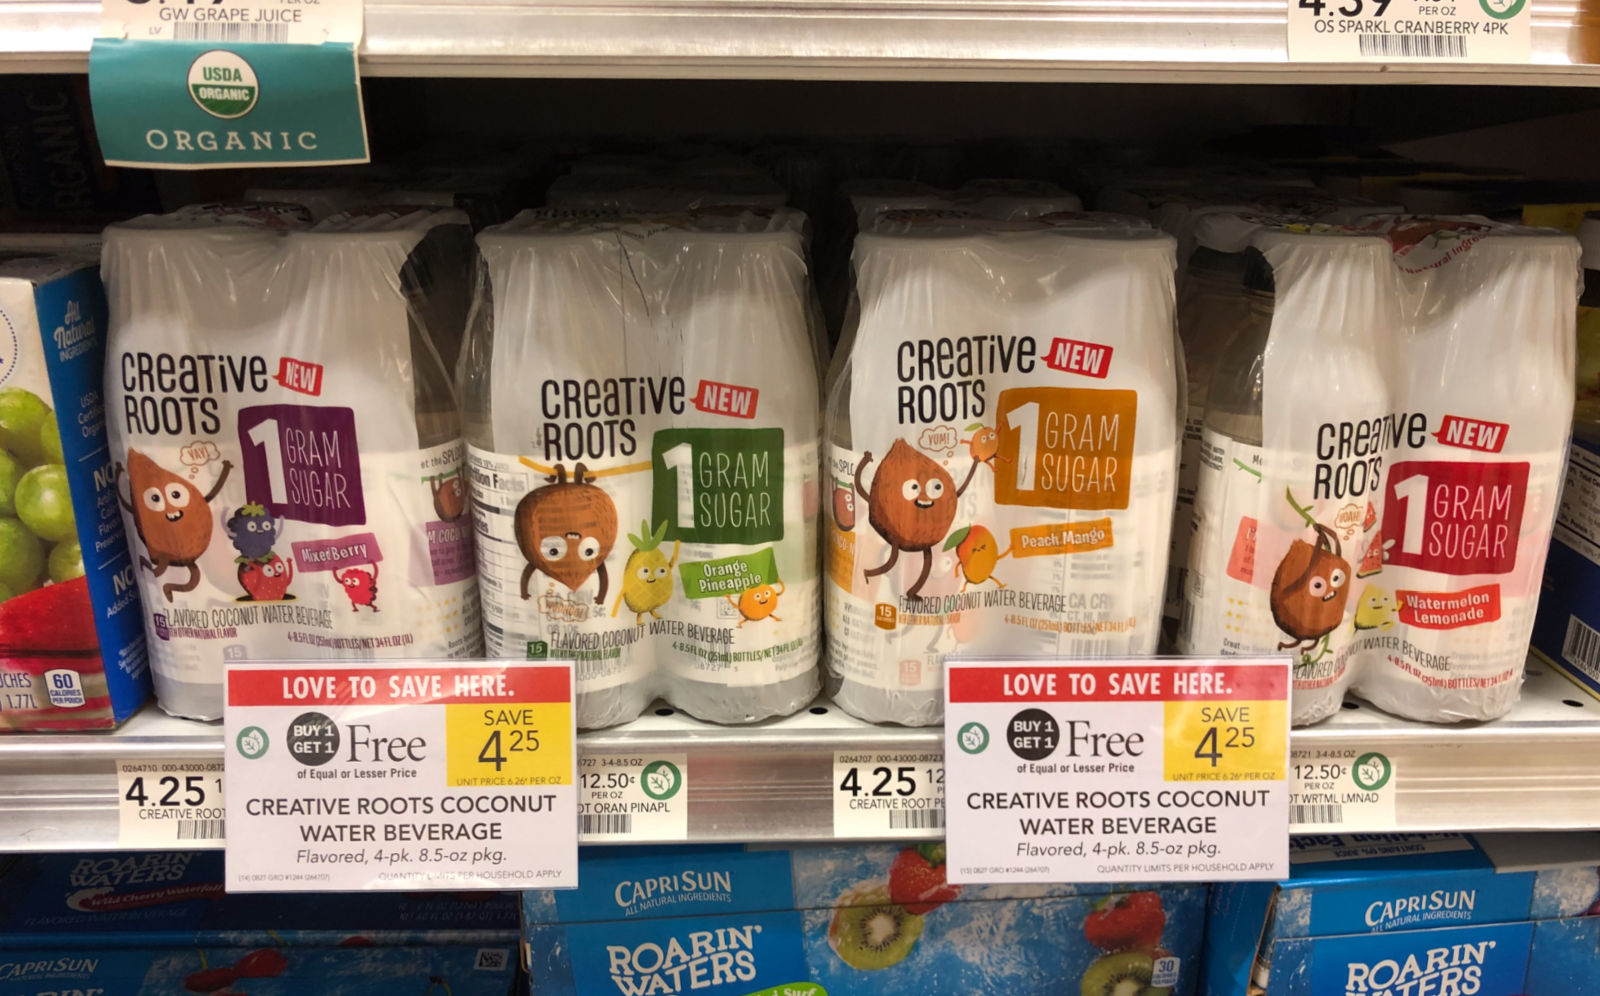 All Four Varieties Of Creative Roots Coconut Water Drinks Are BOGO At Publix! on I Heart Publix 2